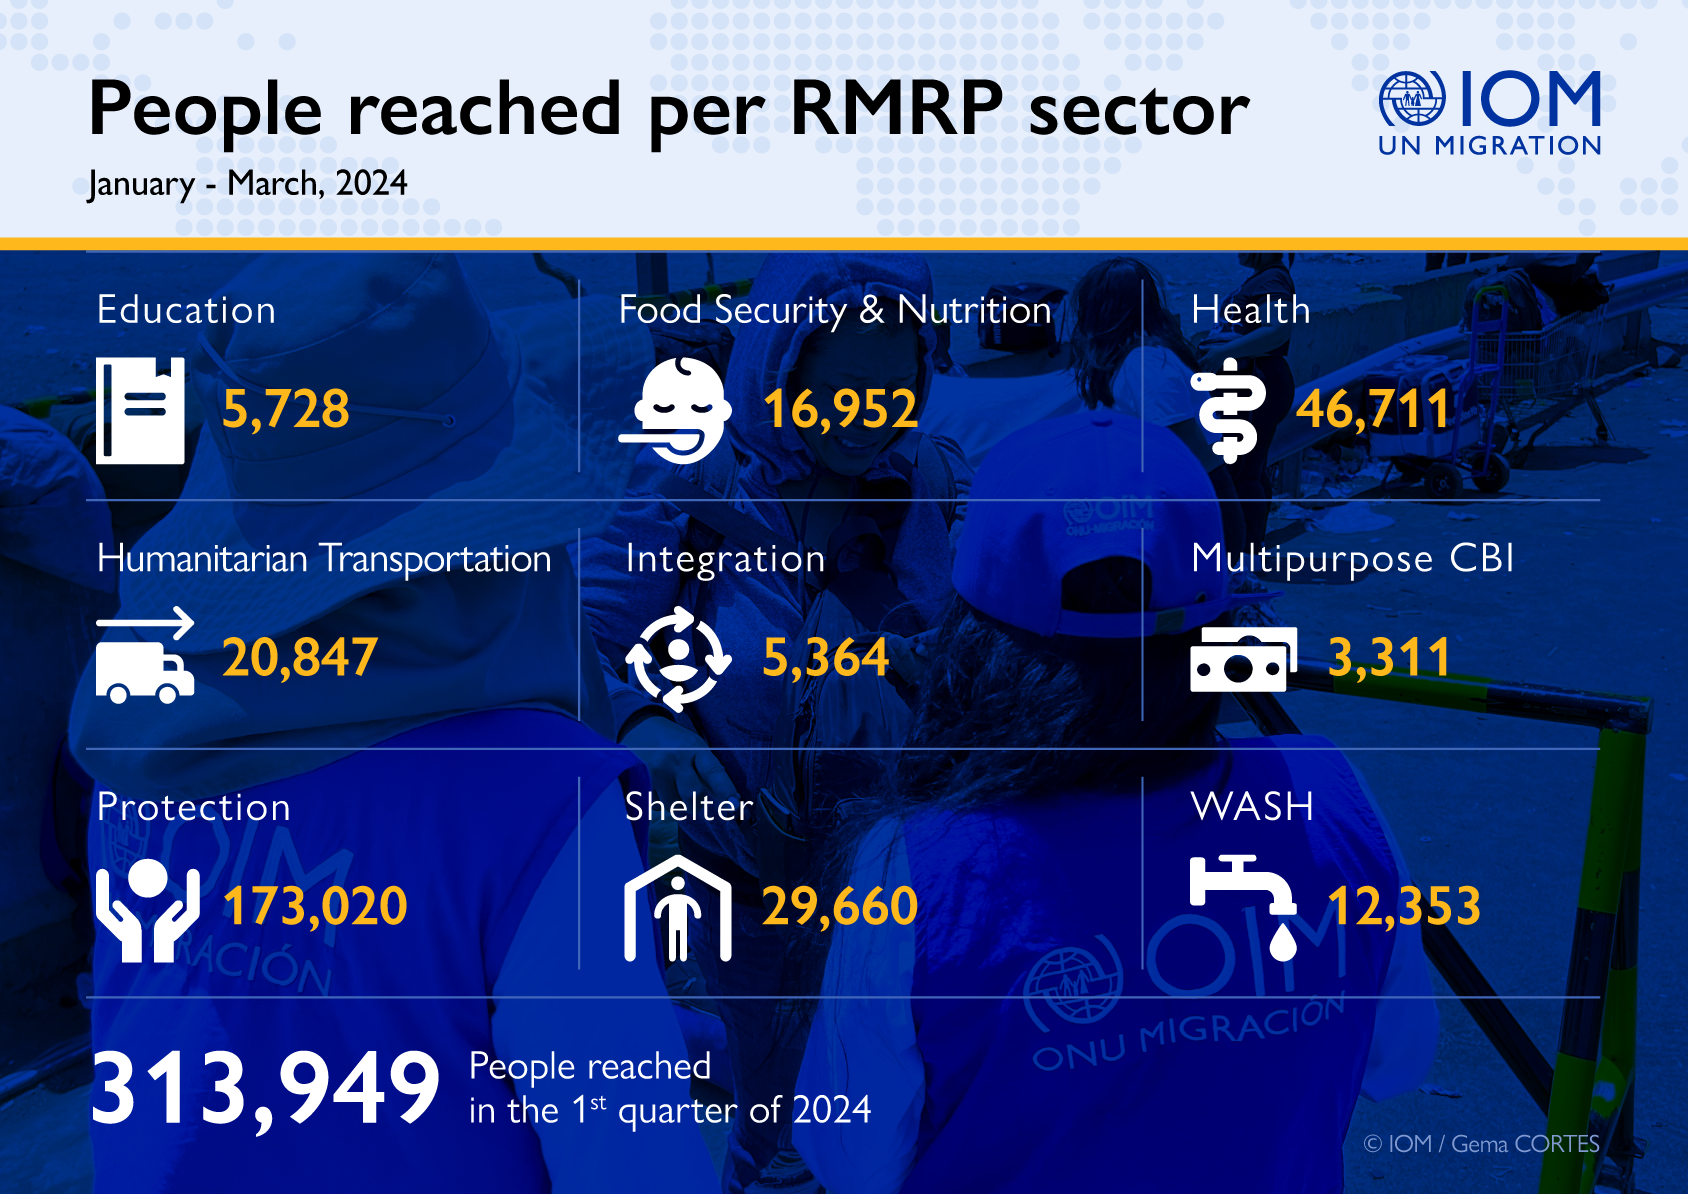 number of beneficiaries per RMRP sector